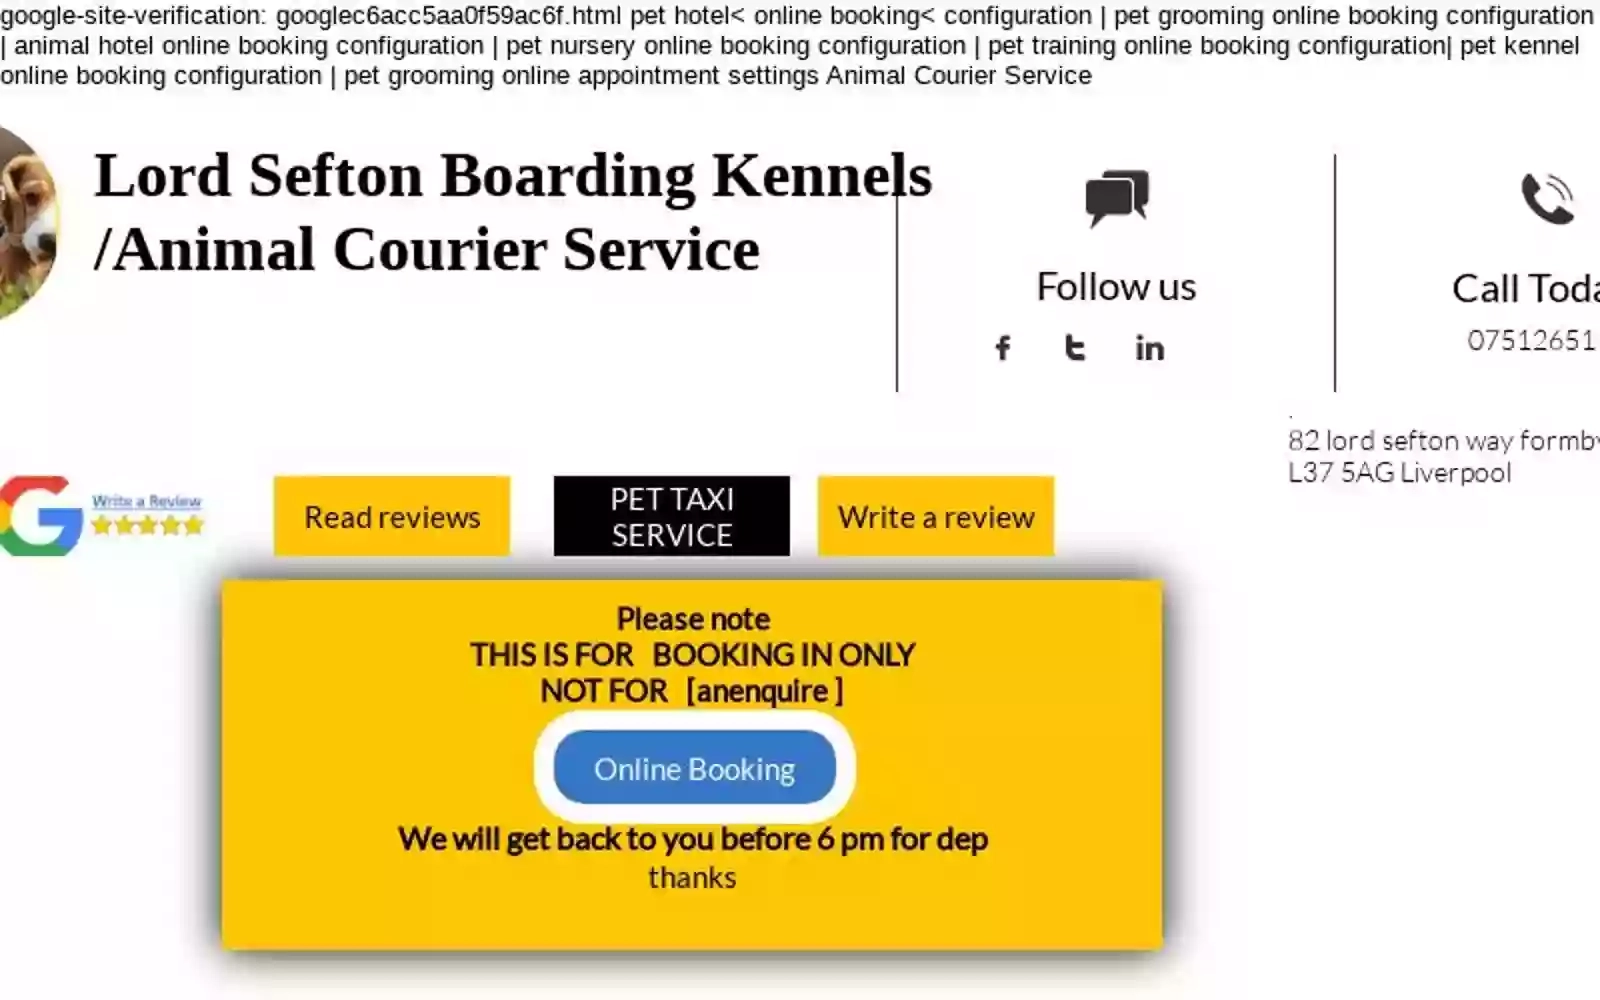 Lord Sefton Dog Boarding Kennels and Pet taxi service